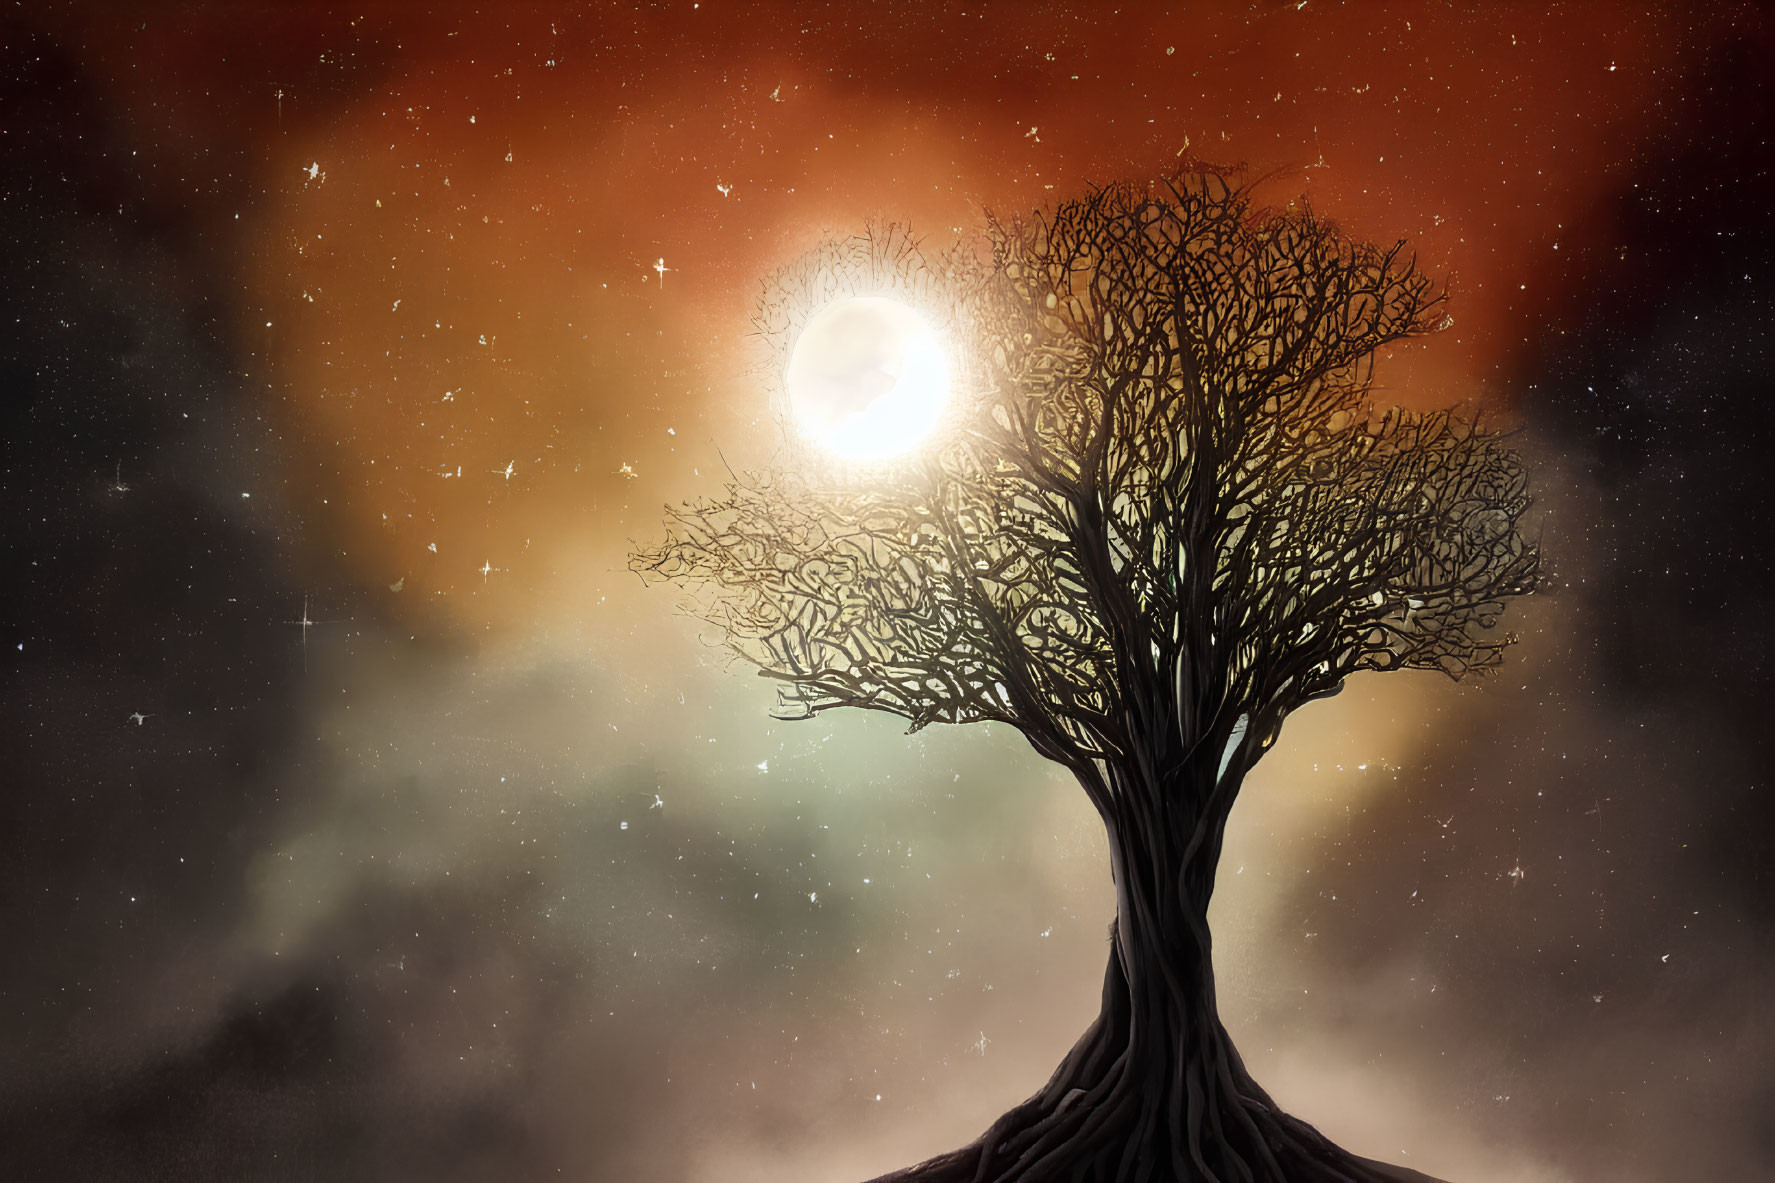 Solitary tree against cosmic backdrop with glowing moon and stars in warm orange and cool green hues